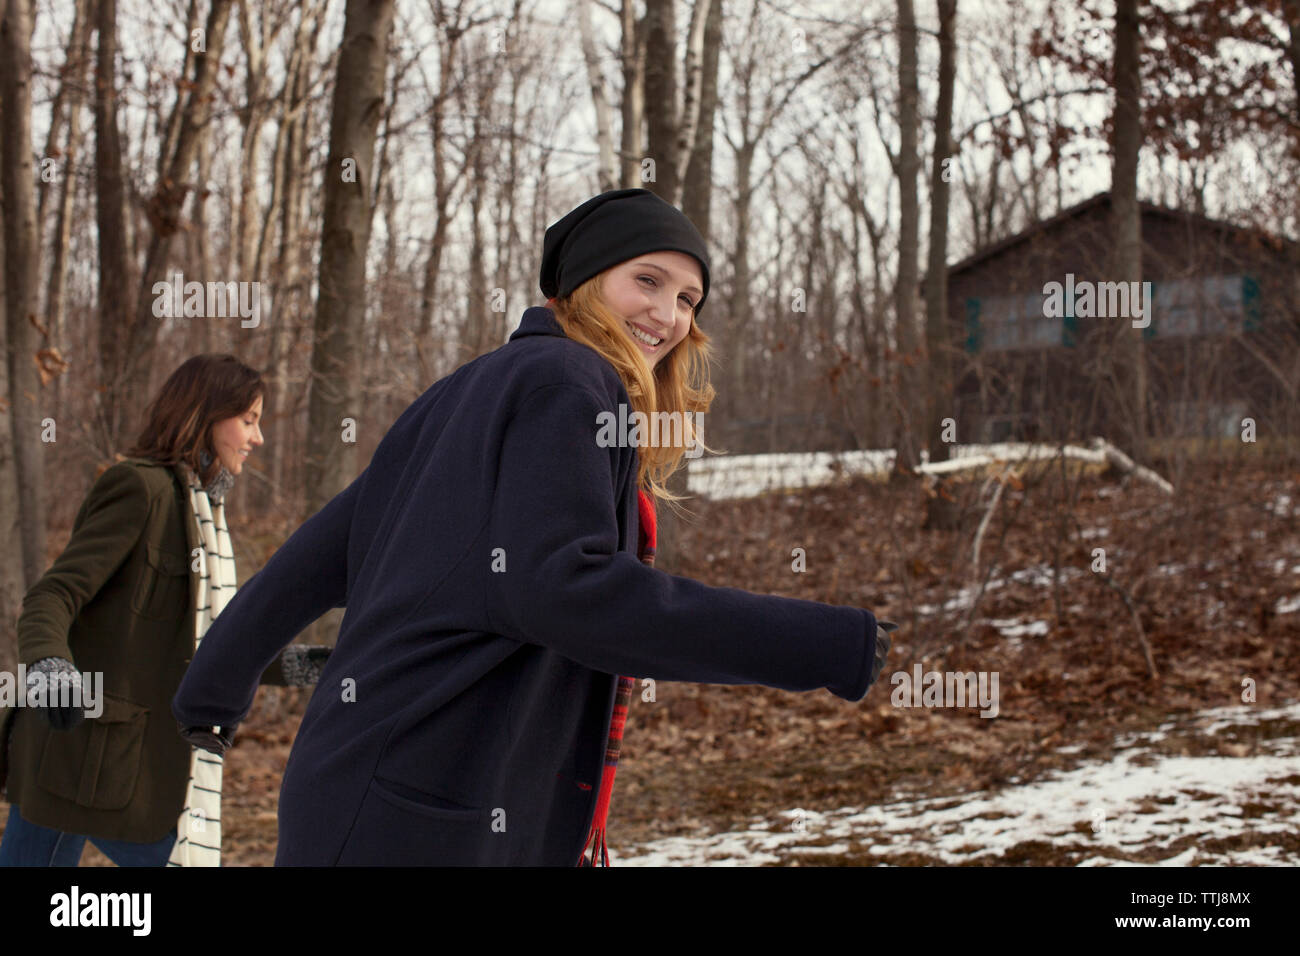 Portrait of woman walking with friend in forest during winter Stock Photo